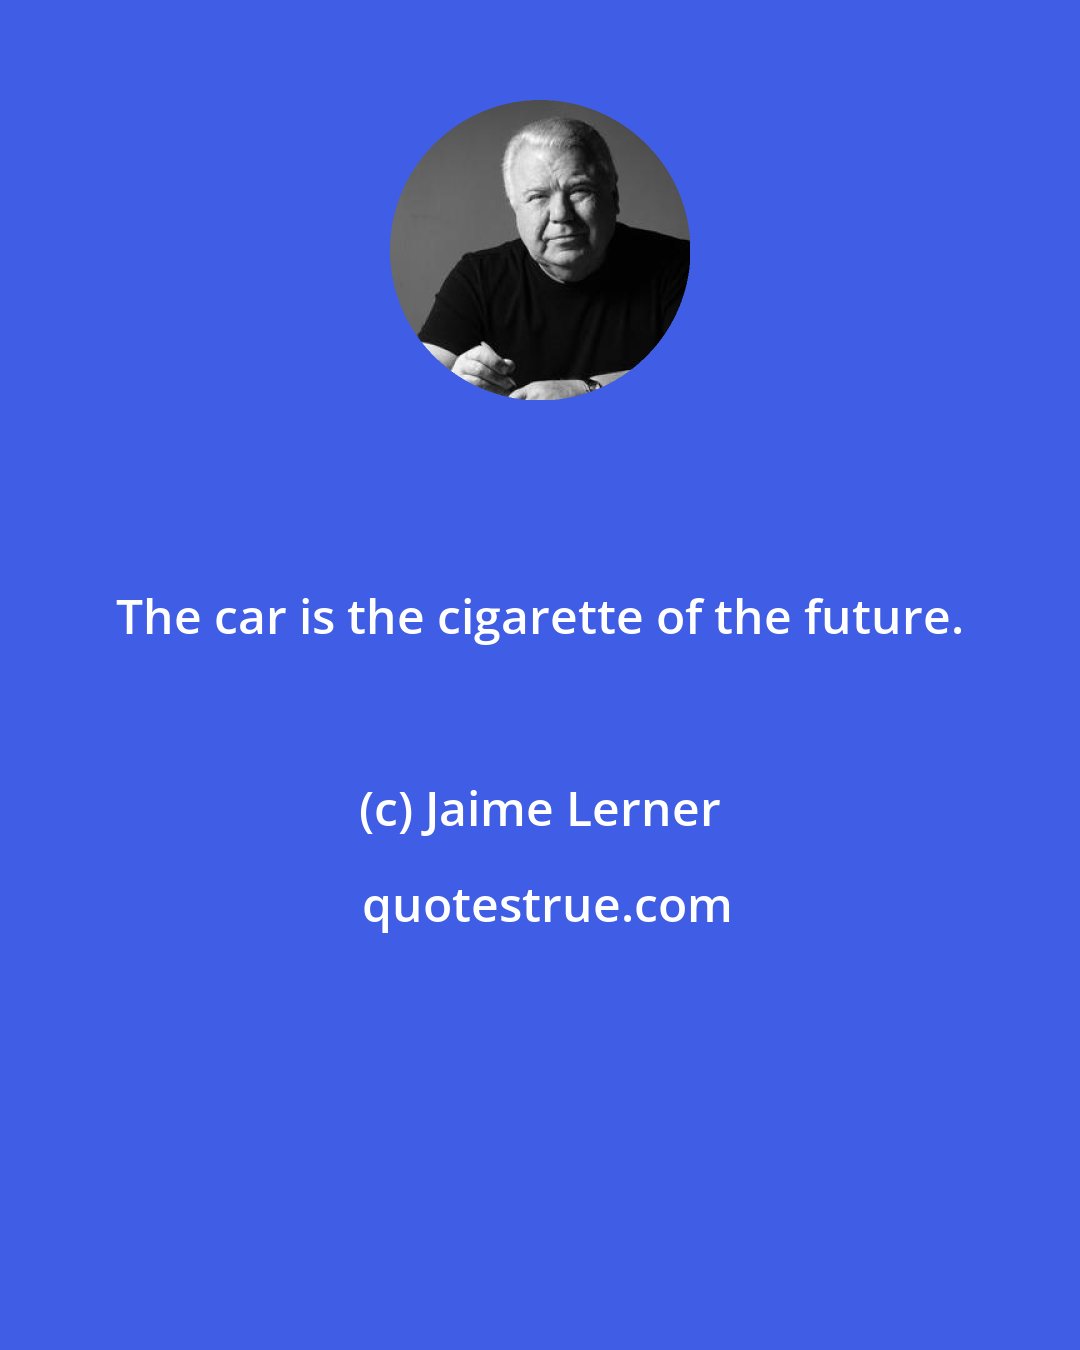 Jaime Lerner: The car is the cigarette of the future.